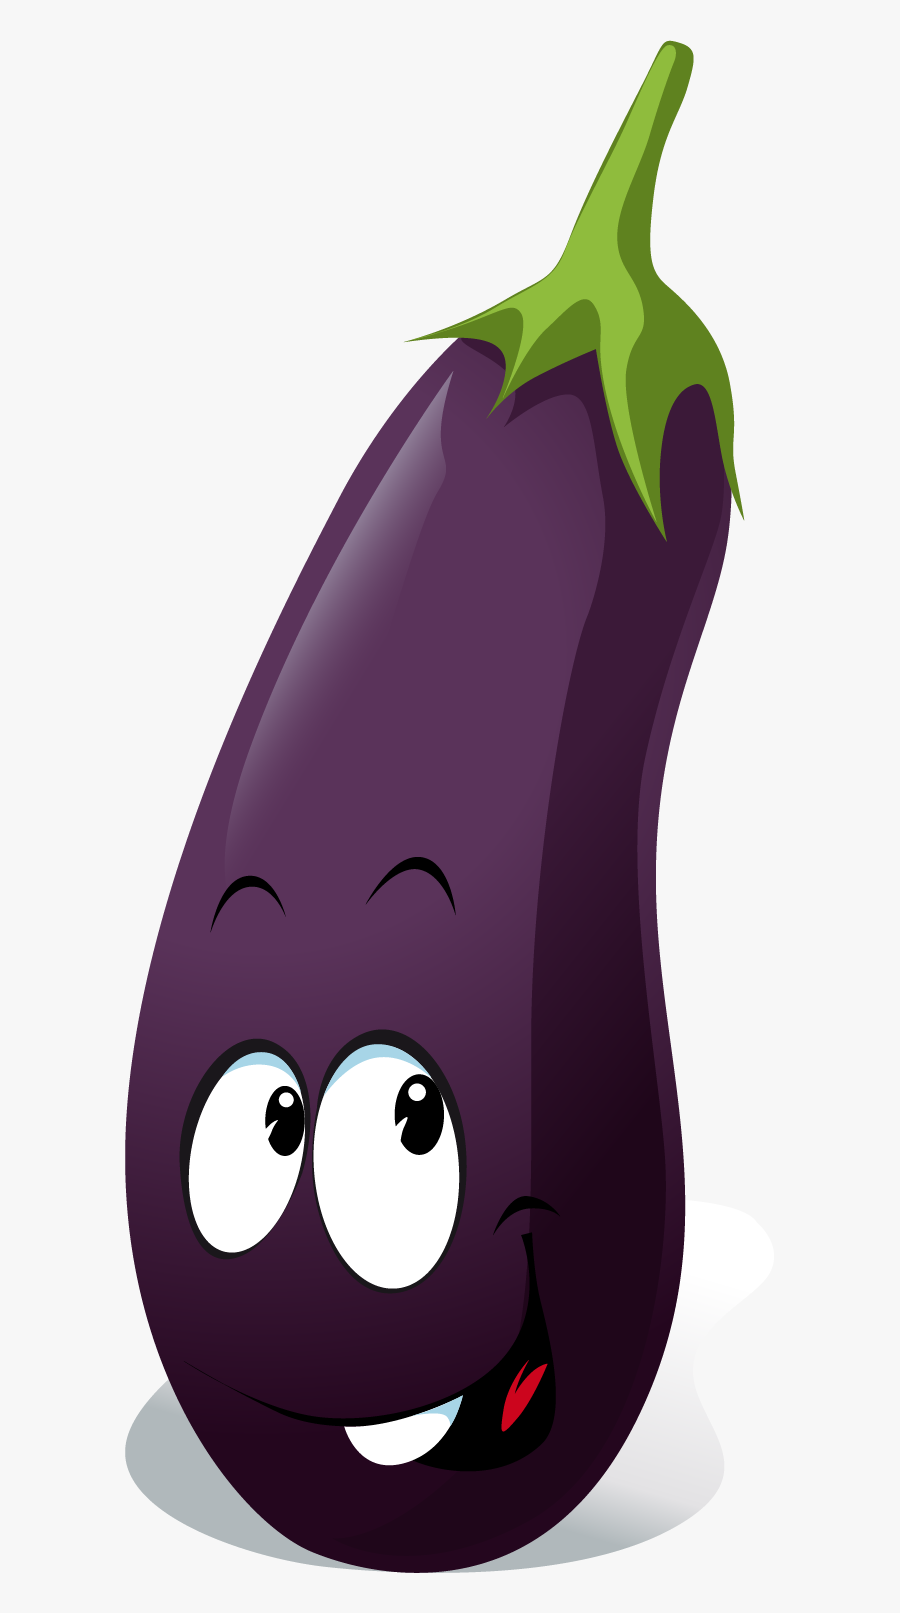 Individual Cartoon Pictures Of Fruits And Vegetables , Free Transparent